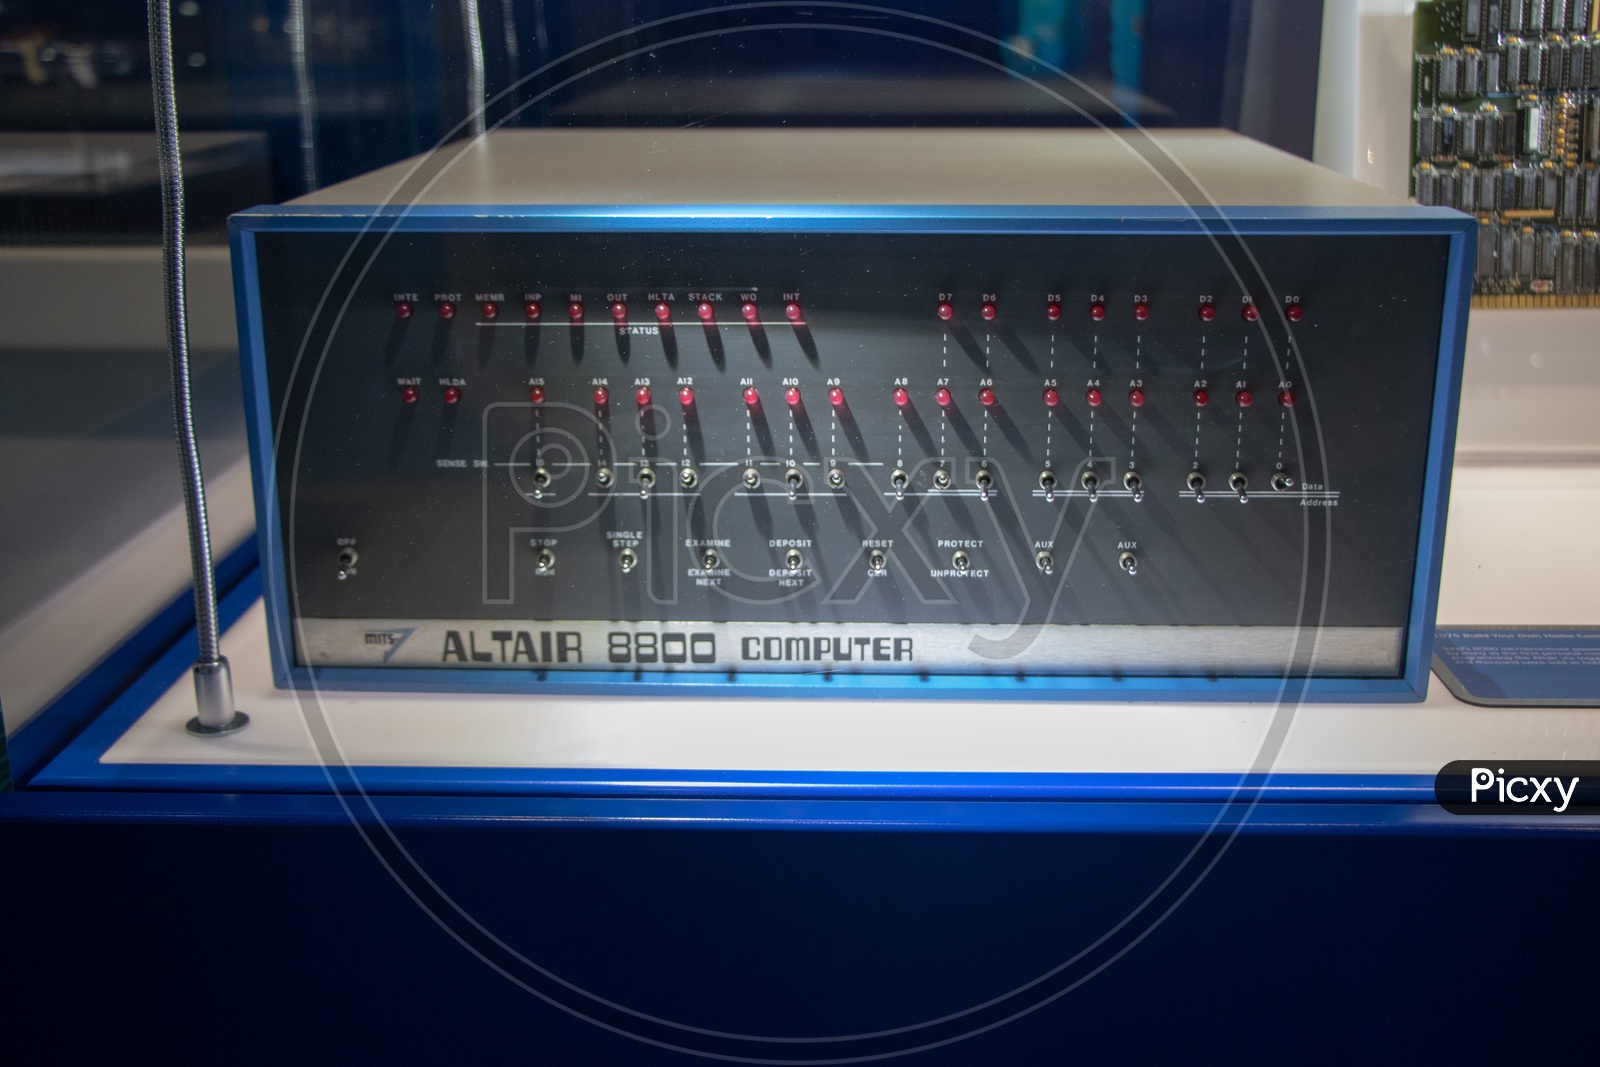 ALTAIR 8800 Computer